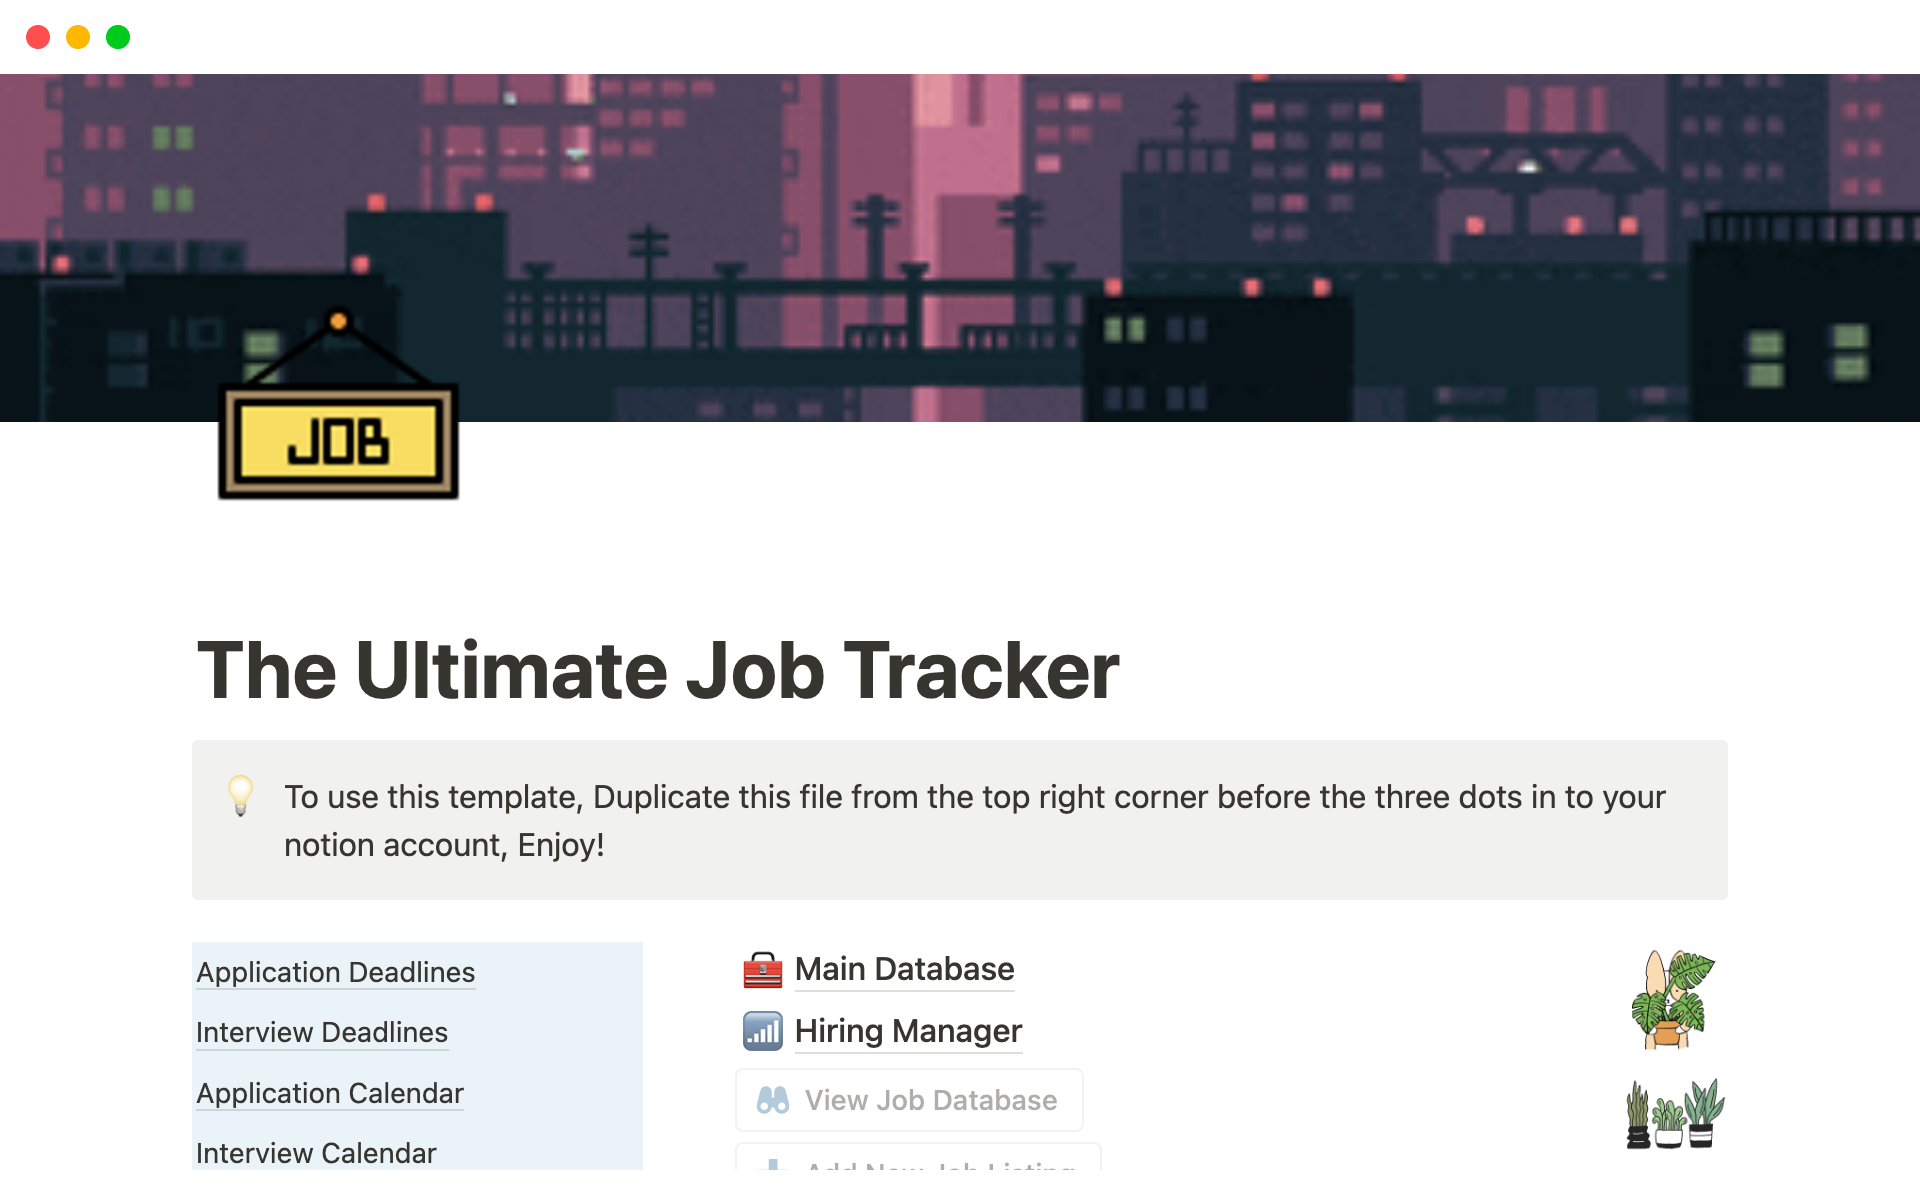 A template preview for Job Application Tracker